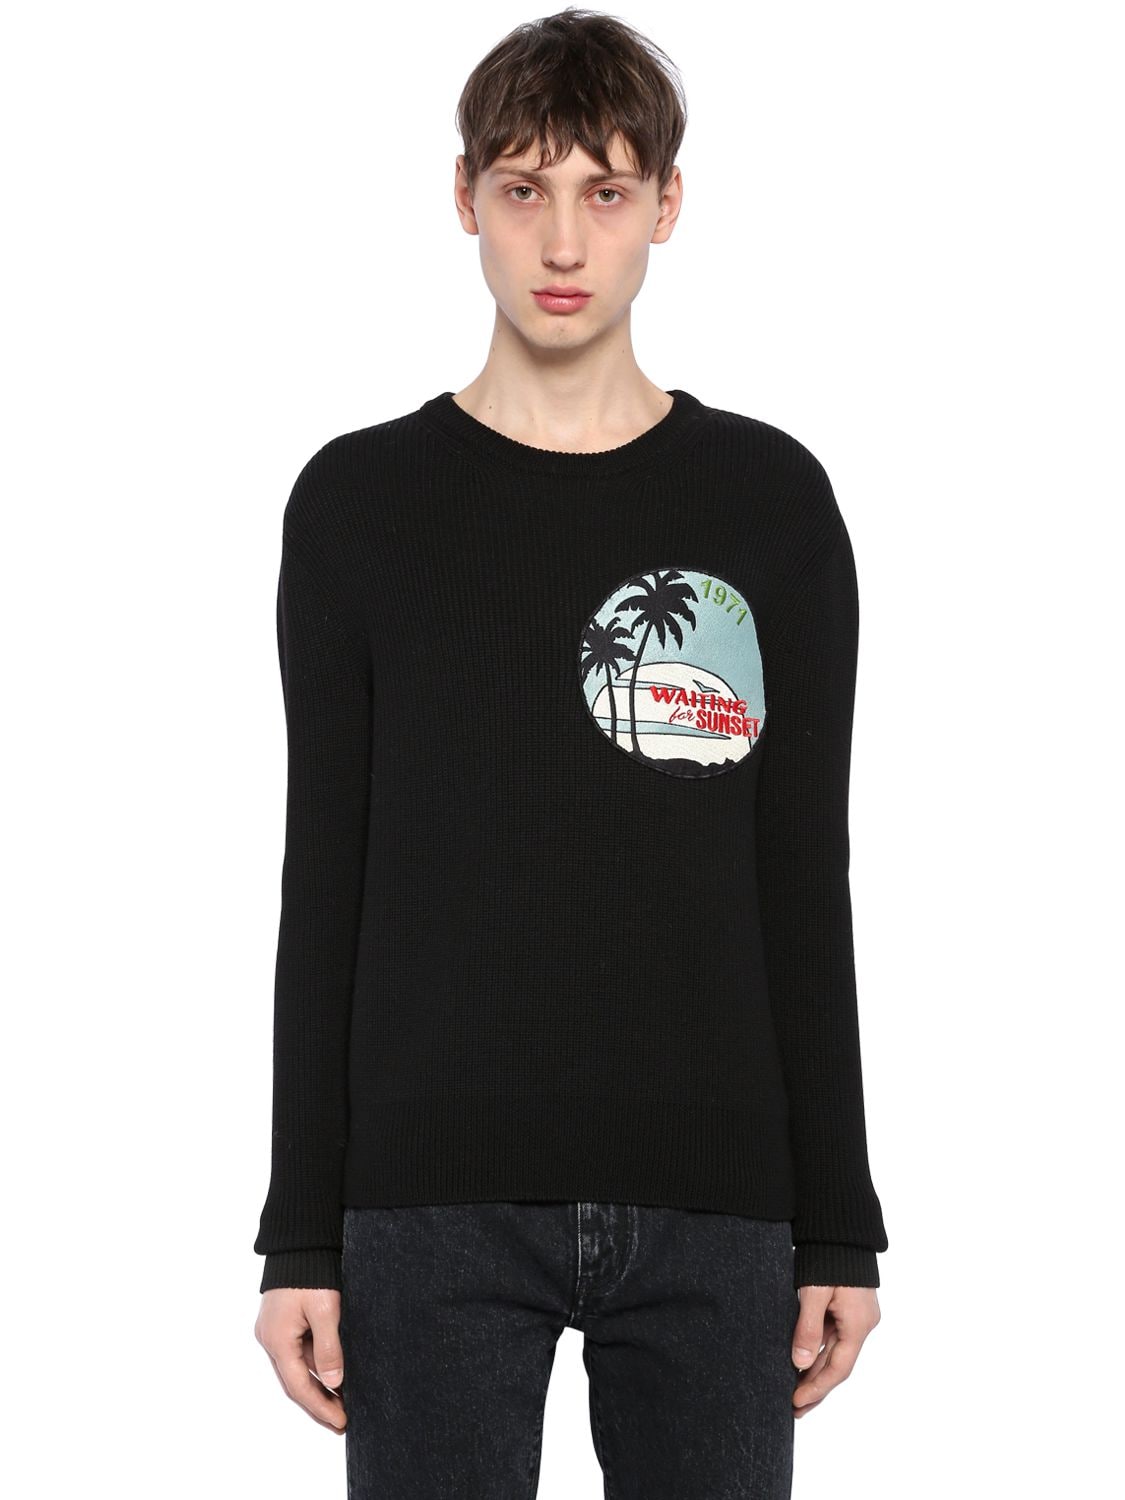 SAINT LAURENT WAITING FOR SUNSET PATCH WOOL SWEATER,67I25Z032-MTAwMA2